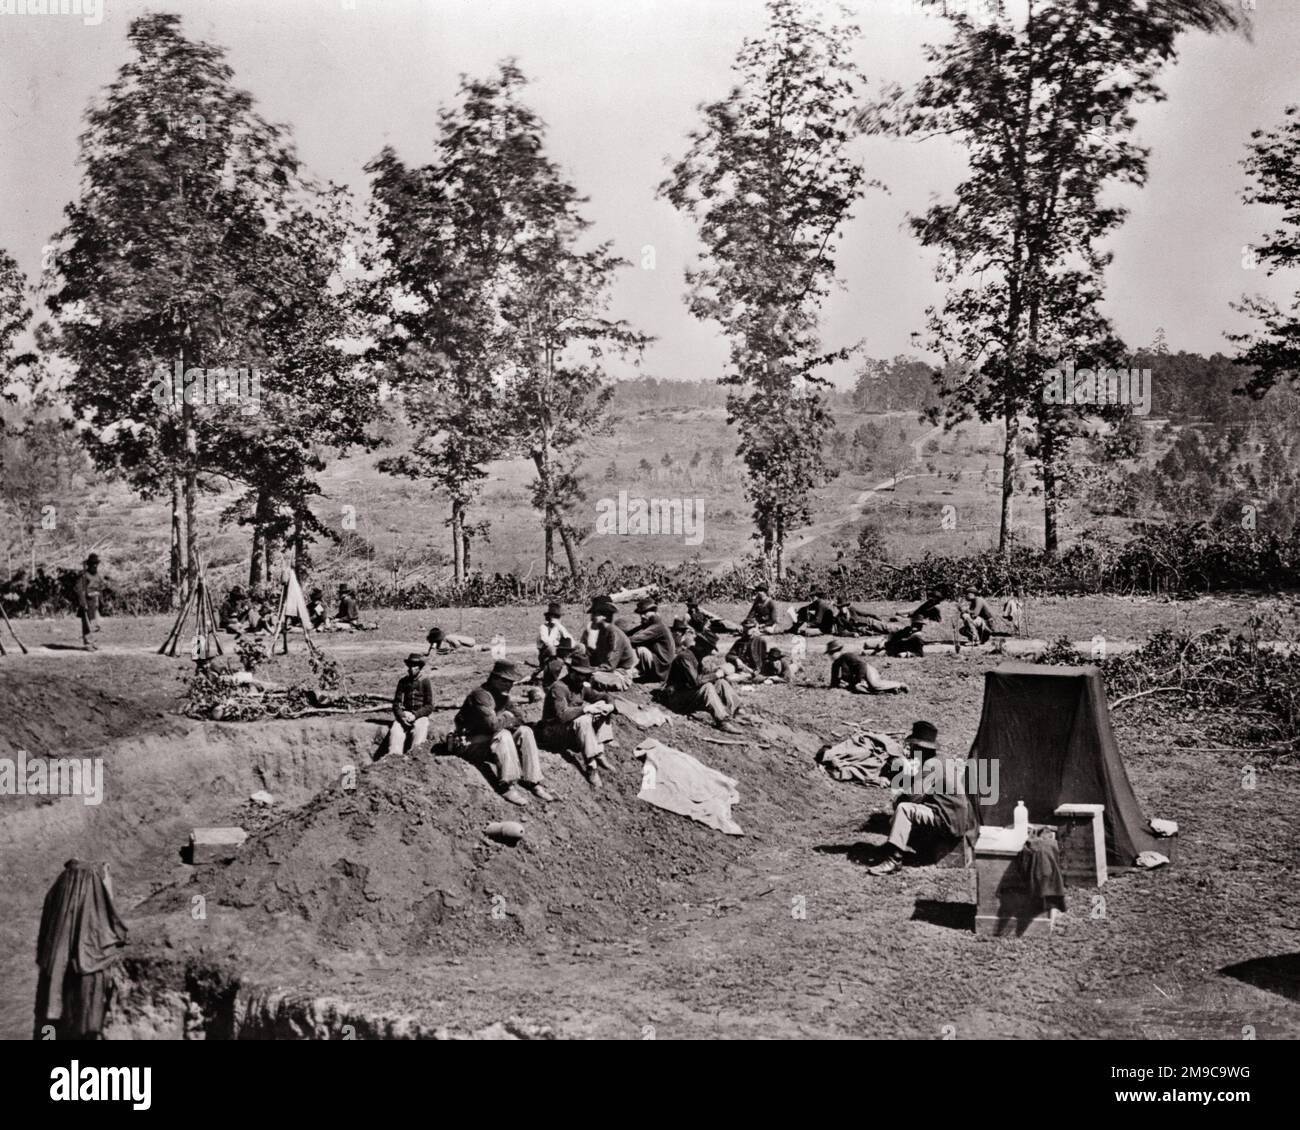 1800s 1860s JULY 22 1864 FEDERAL UNION LINES AMERICAN CIVIL WAR PROBABLY PHOTO BY GEORGE BARNARD SOUTHEAST OF ATLANTA GA USA   - h7551 LAN001 HARS WIDE ANGLE HIGH ANGLE STRENGTH VICTORY UNION COURAGE EXCITEMENT POWERFUL SOUTHEAST LABOR PRIDE OPPORTUNITY LINES OCCUPATIONS POLITICS UNIFORMS CONCEPTUAL 1860s FORTIFICATIONS JULY 22 TOGETHERNESS TRENCHES 1864 AMERICAN CIVIL WAR BATTLES BLACK AND WHITE CIVIL WAR CONFLICTS FEDERAL GA OLD FASHIONED Stock Photo